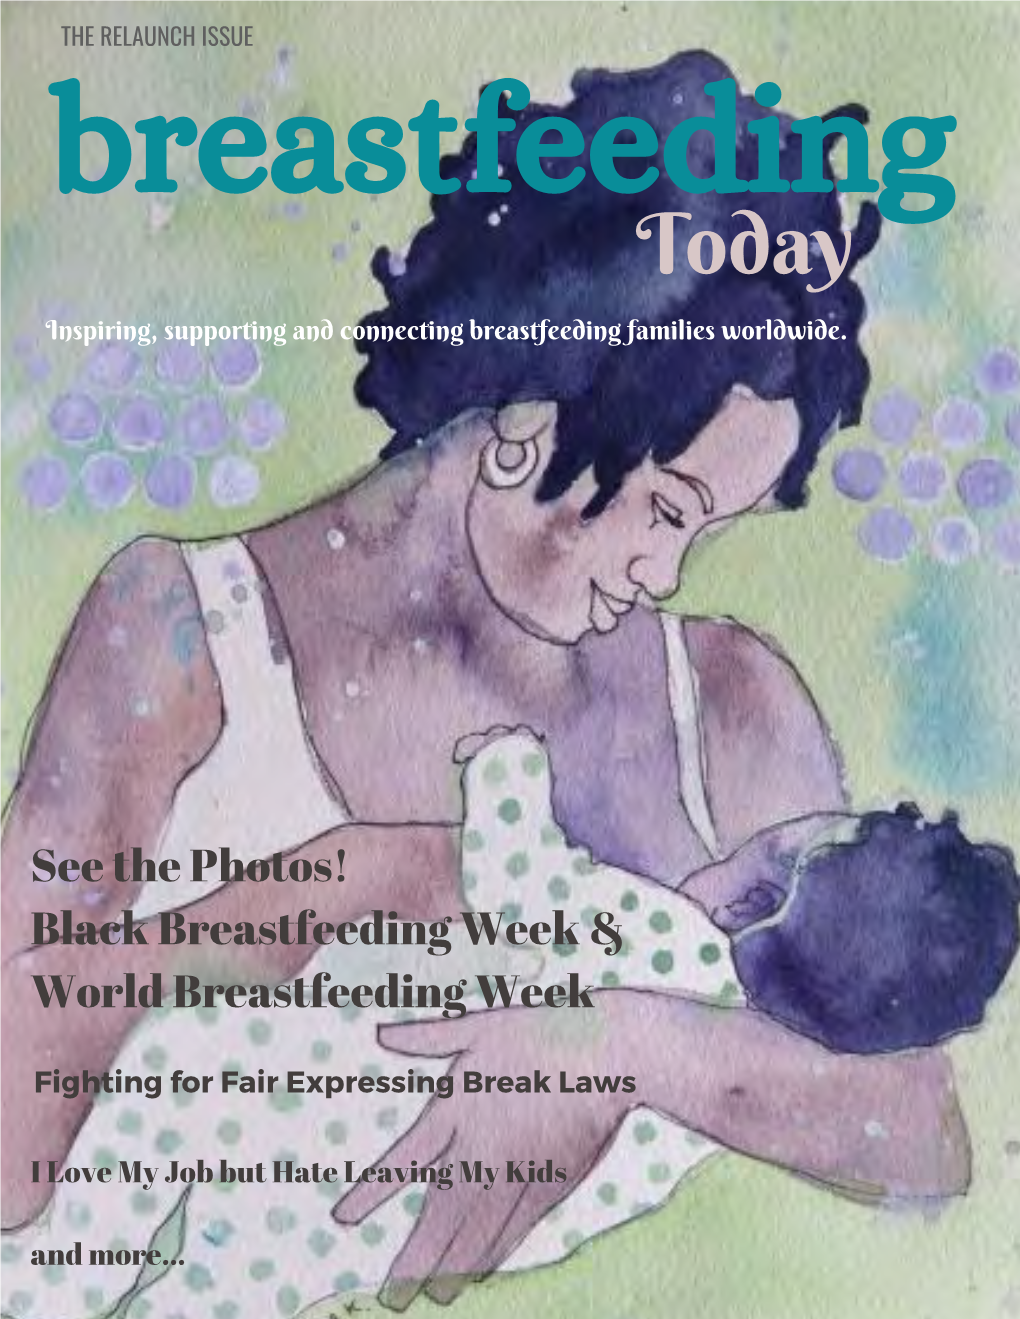 Breastfeeding Today Inspiring, Supporting and Connecting Breastfeeding Families Worldwide